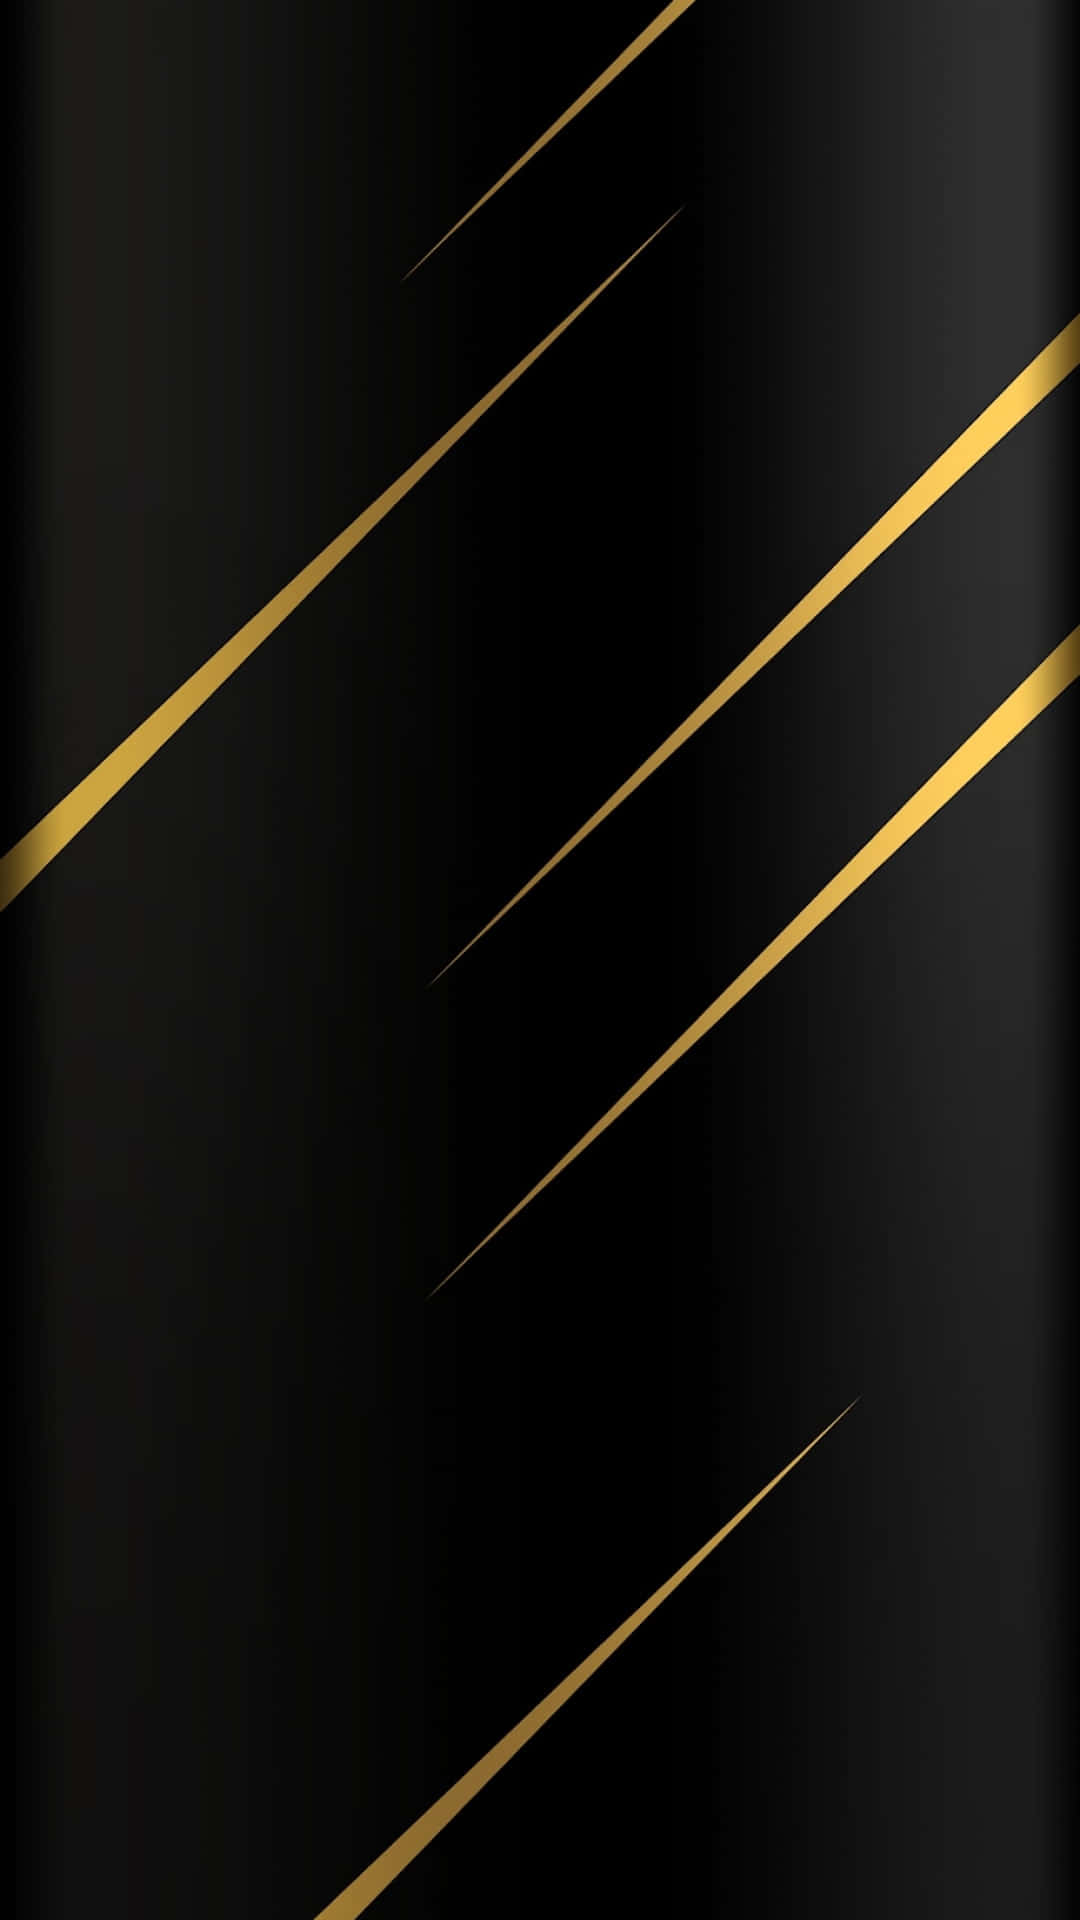 Add a touch of sophistication to any room with this luxurious black and gold background.